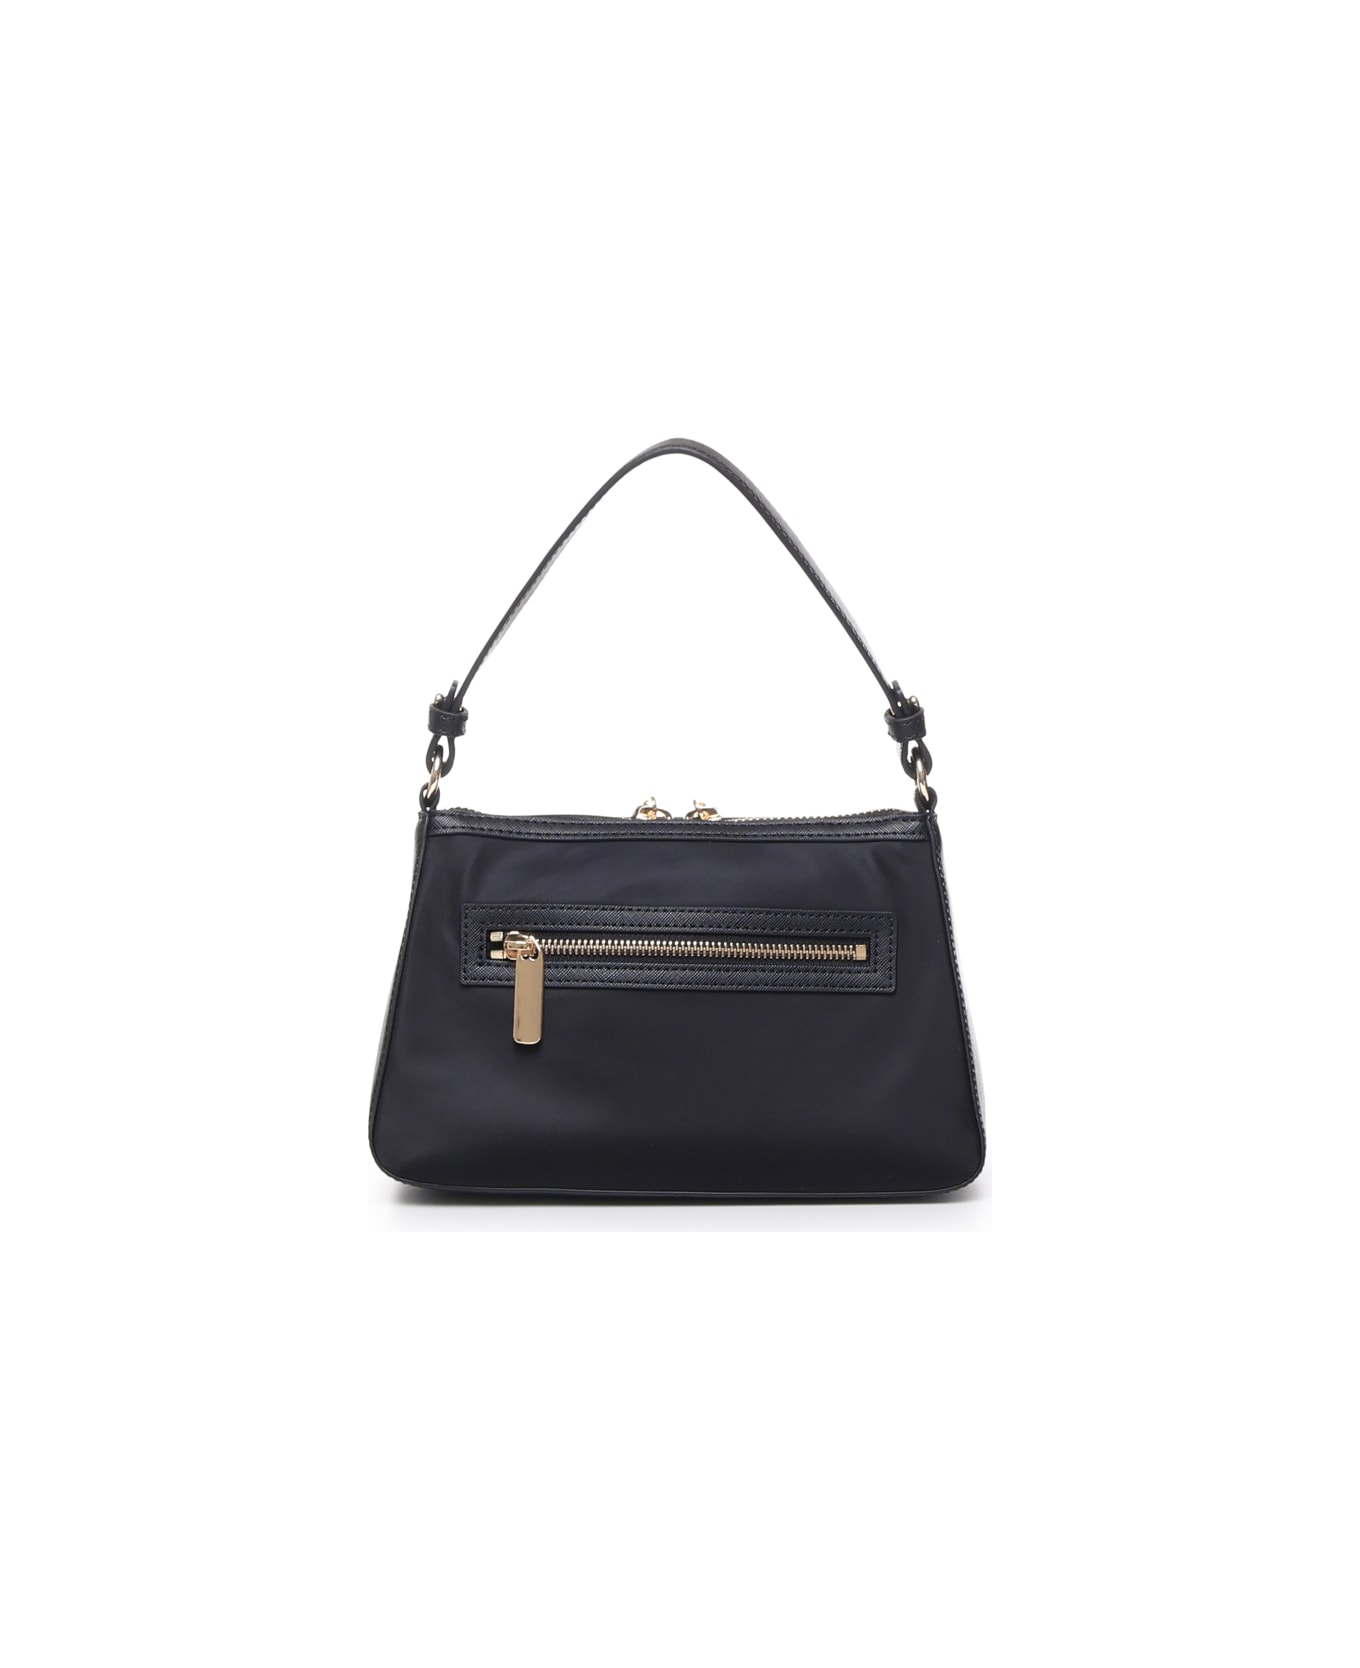 Love Moschino Bag With Handle And Shoulder Strap - Black